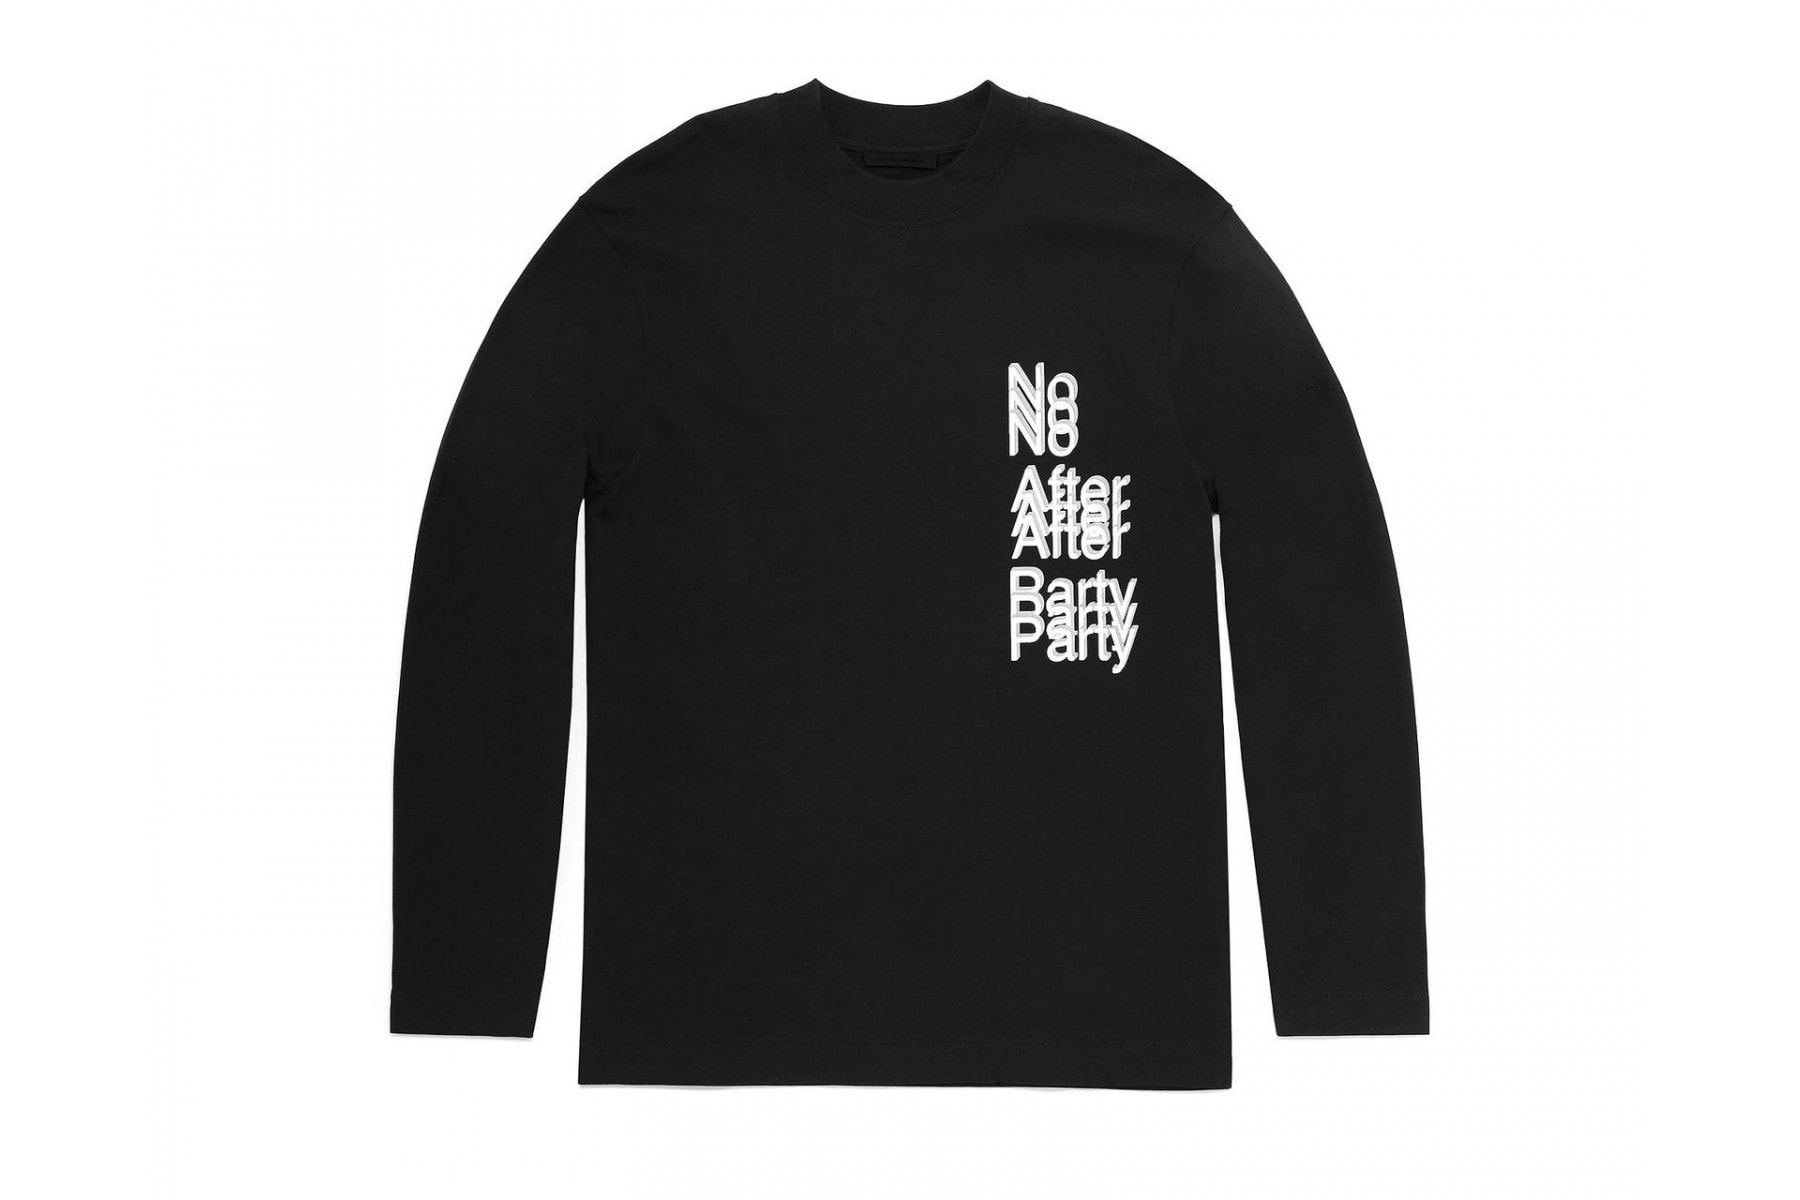 Alexander Wang 2017 "No After Party" Capsule Collection